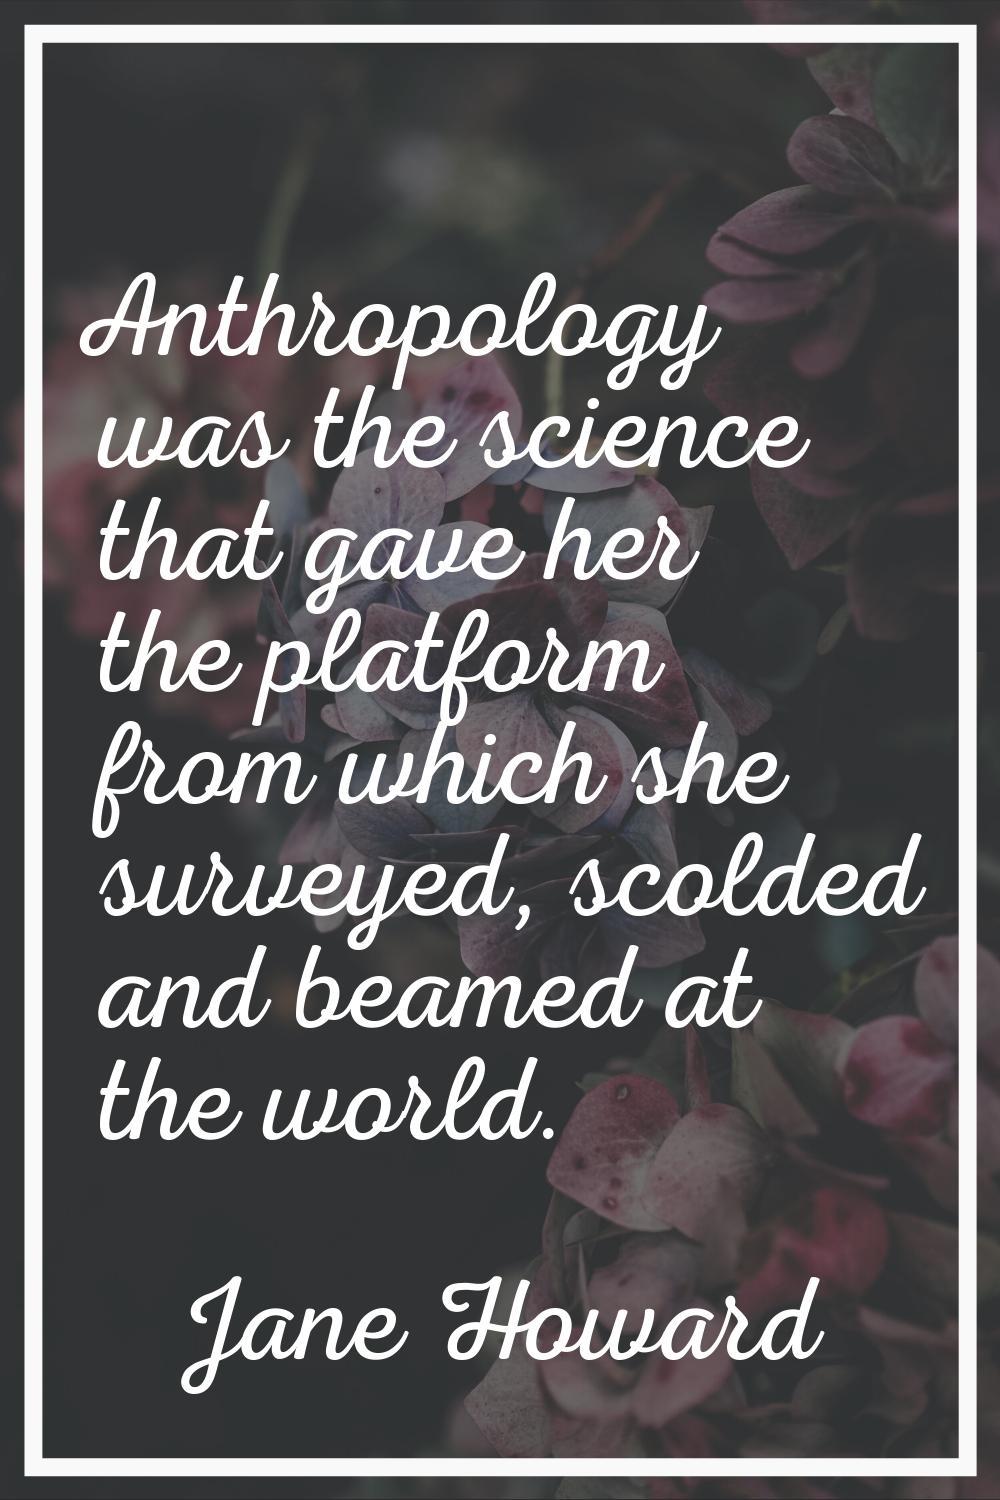 Anthropology was the science that gave her the platform from which she surveyed, scolded and beamed